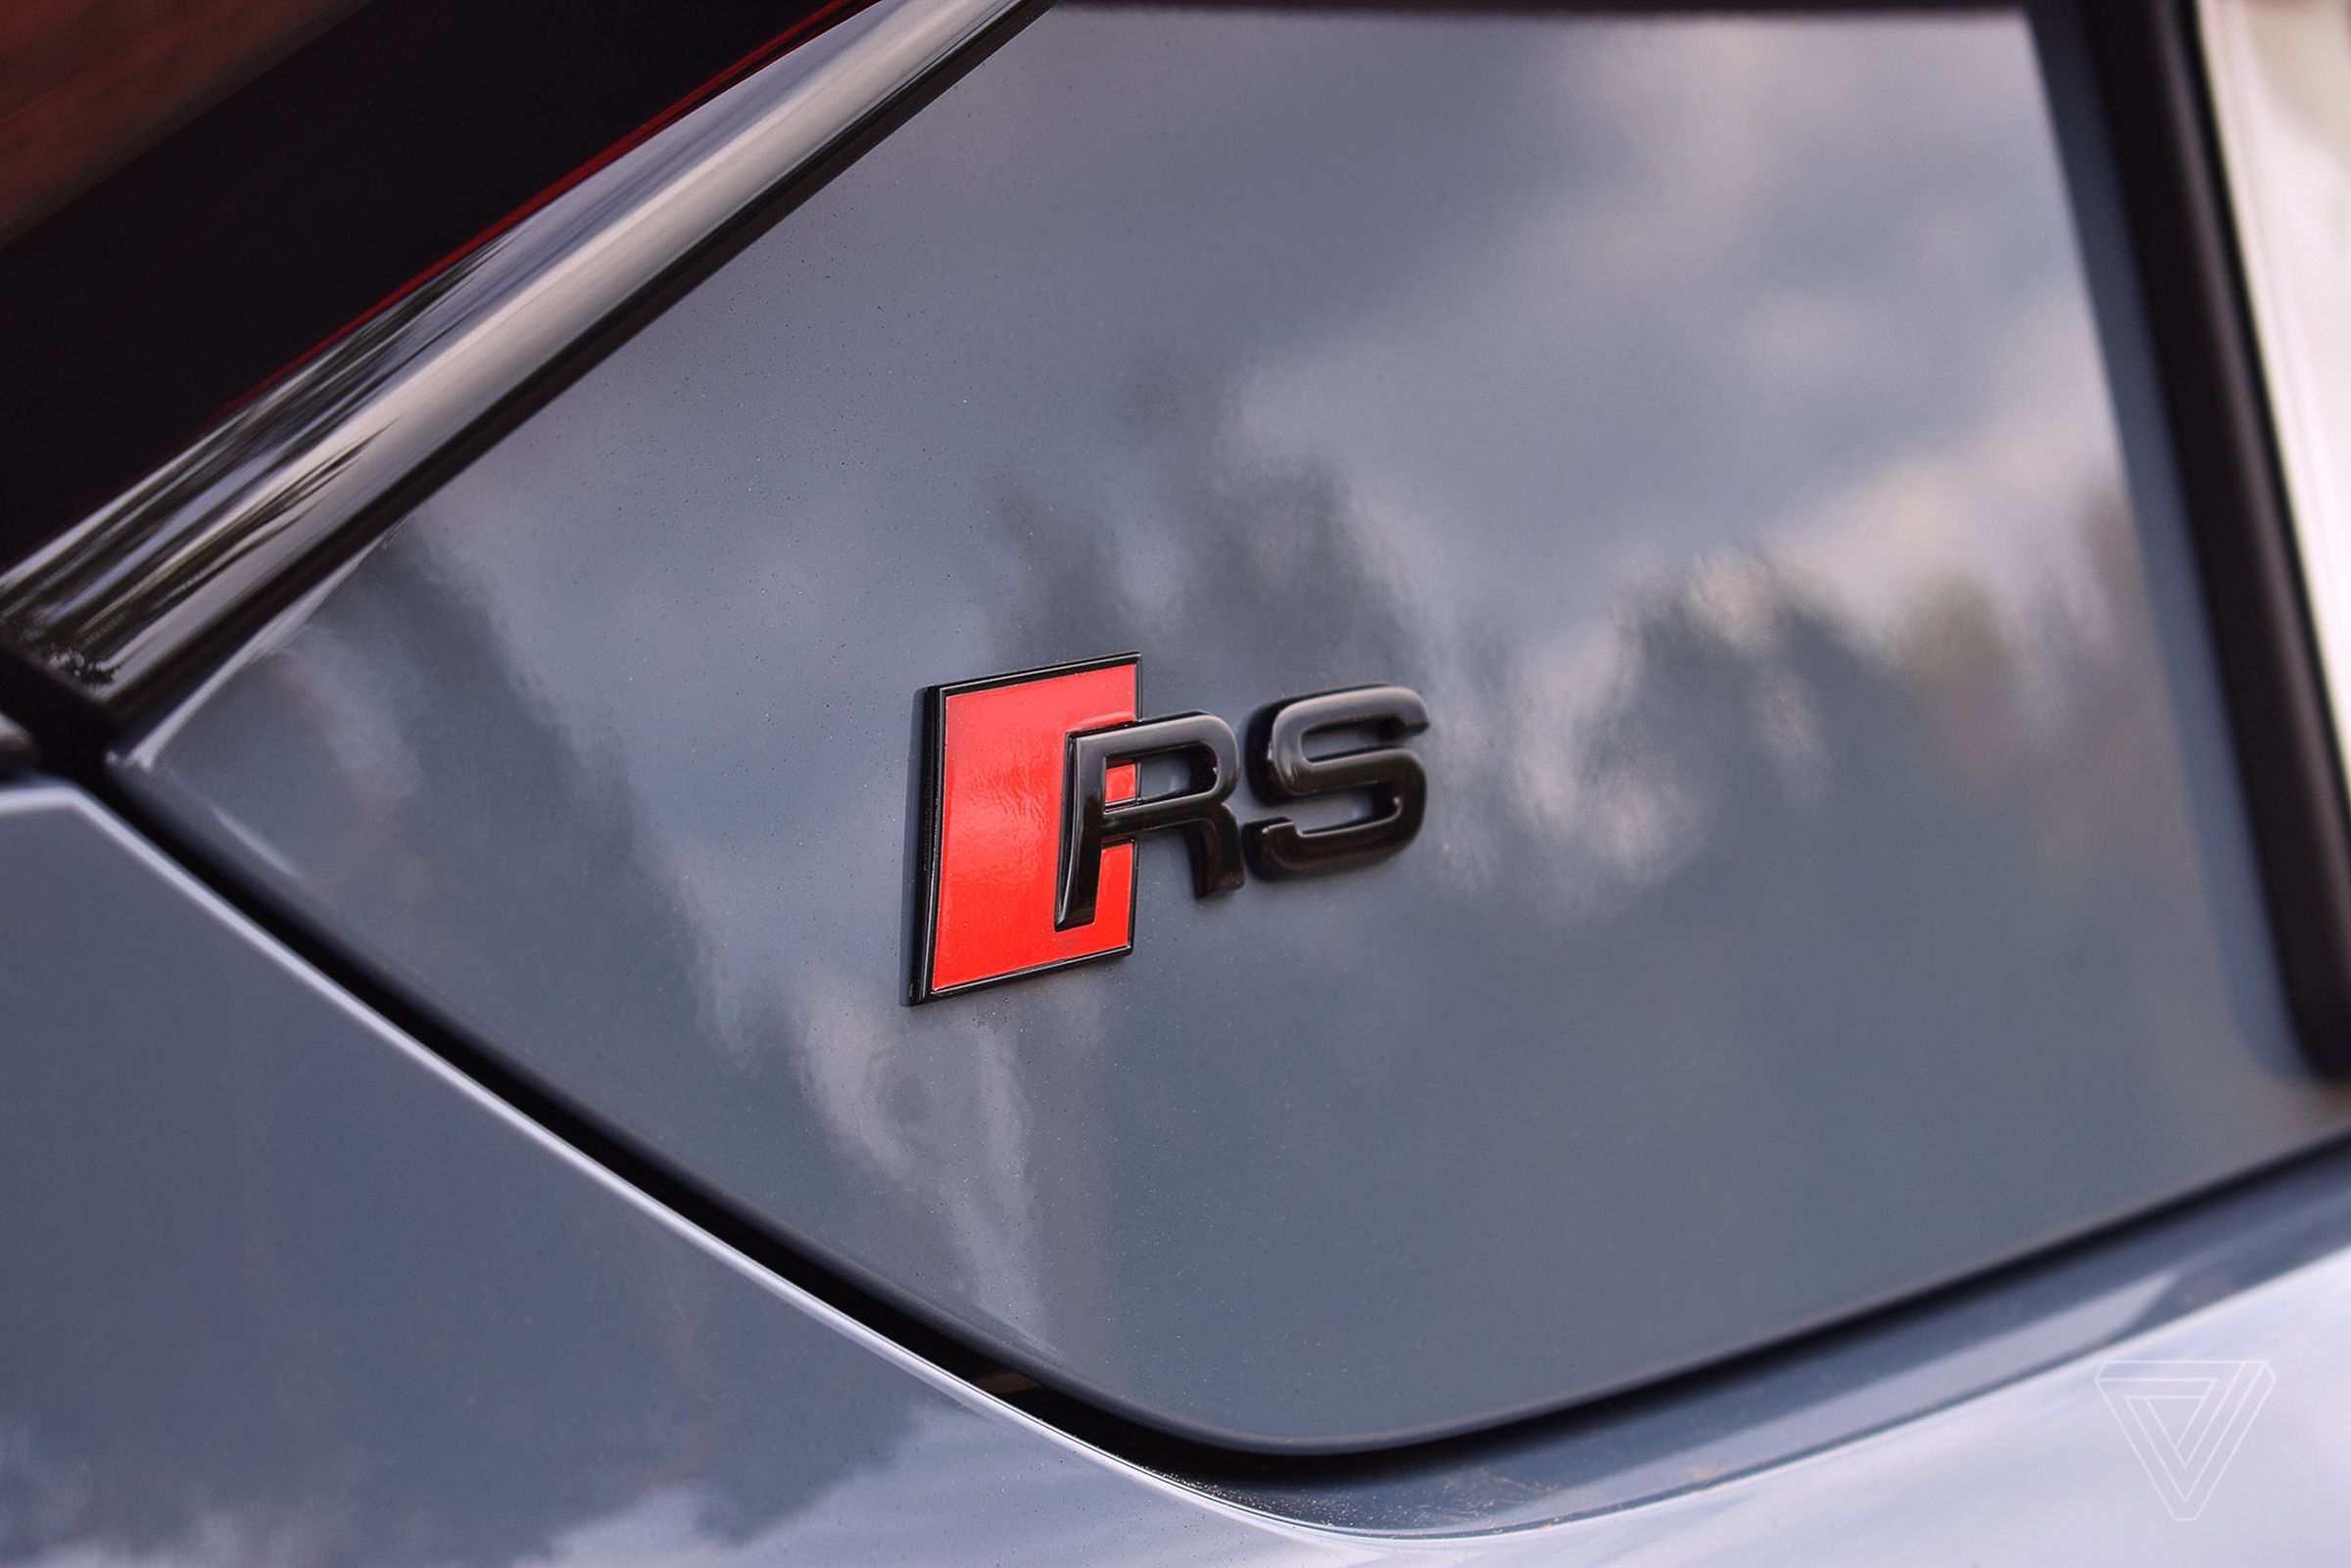 RS translates from the German Renn Sport, which literally means racing sport. 